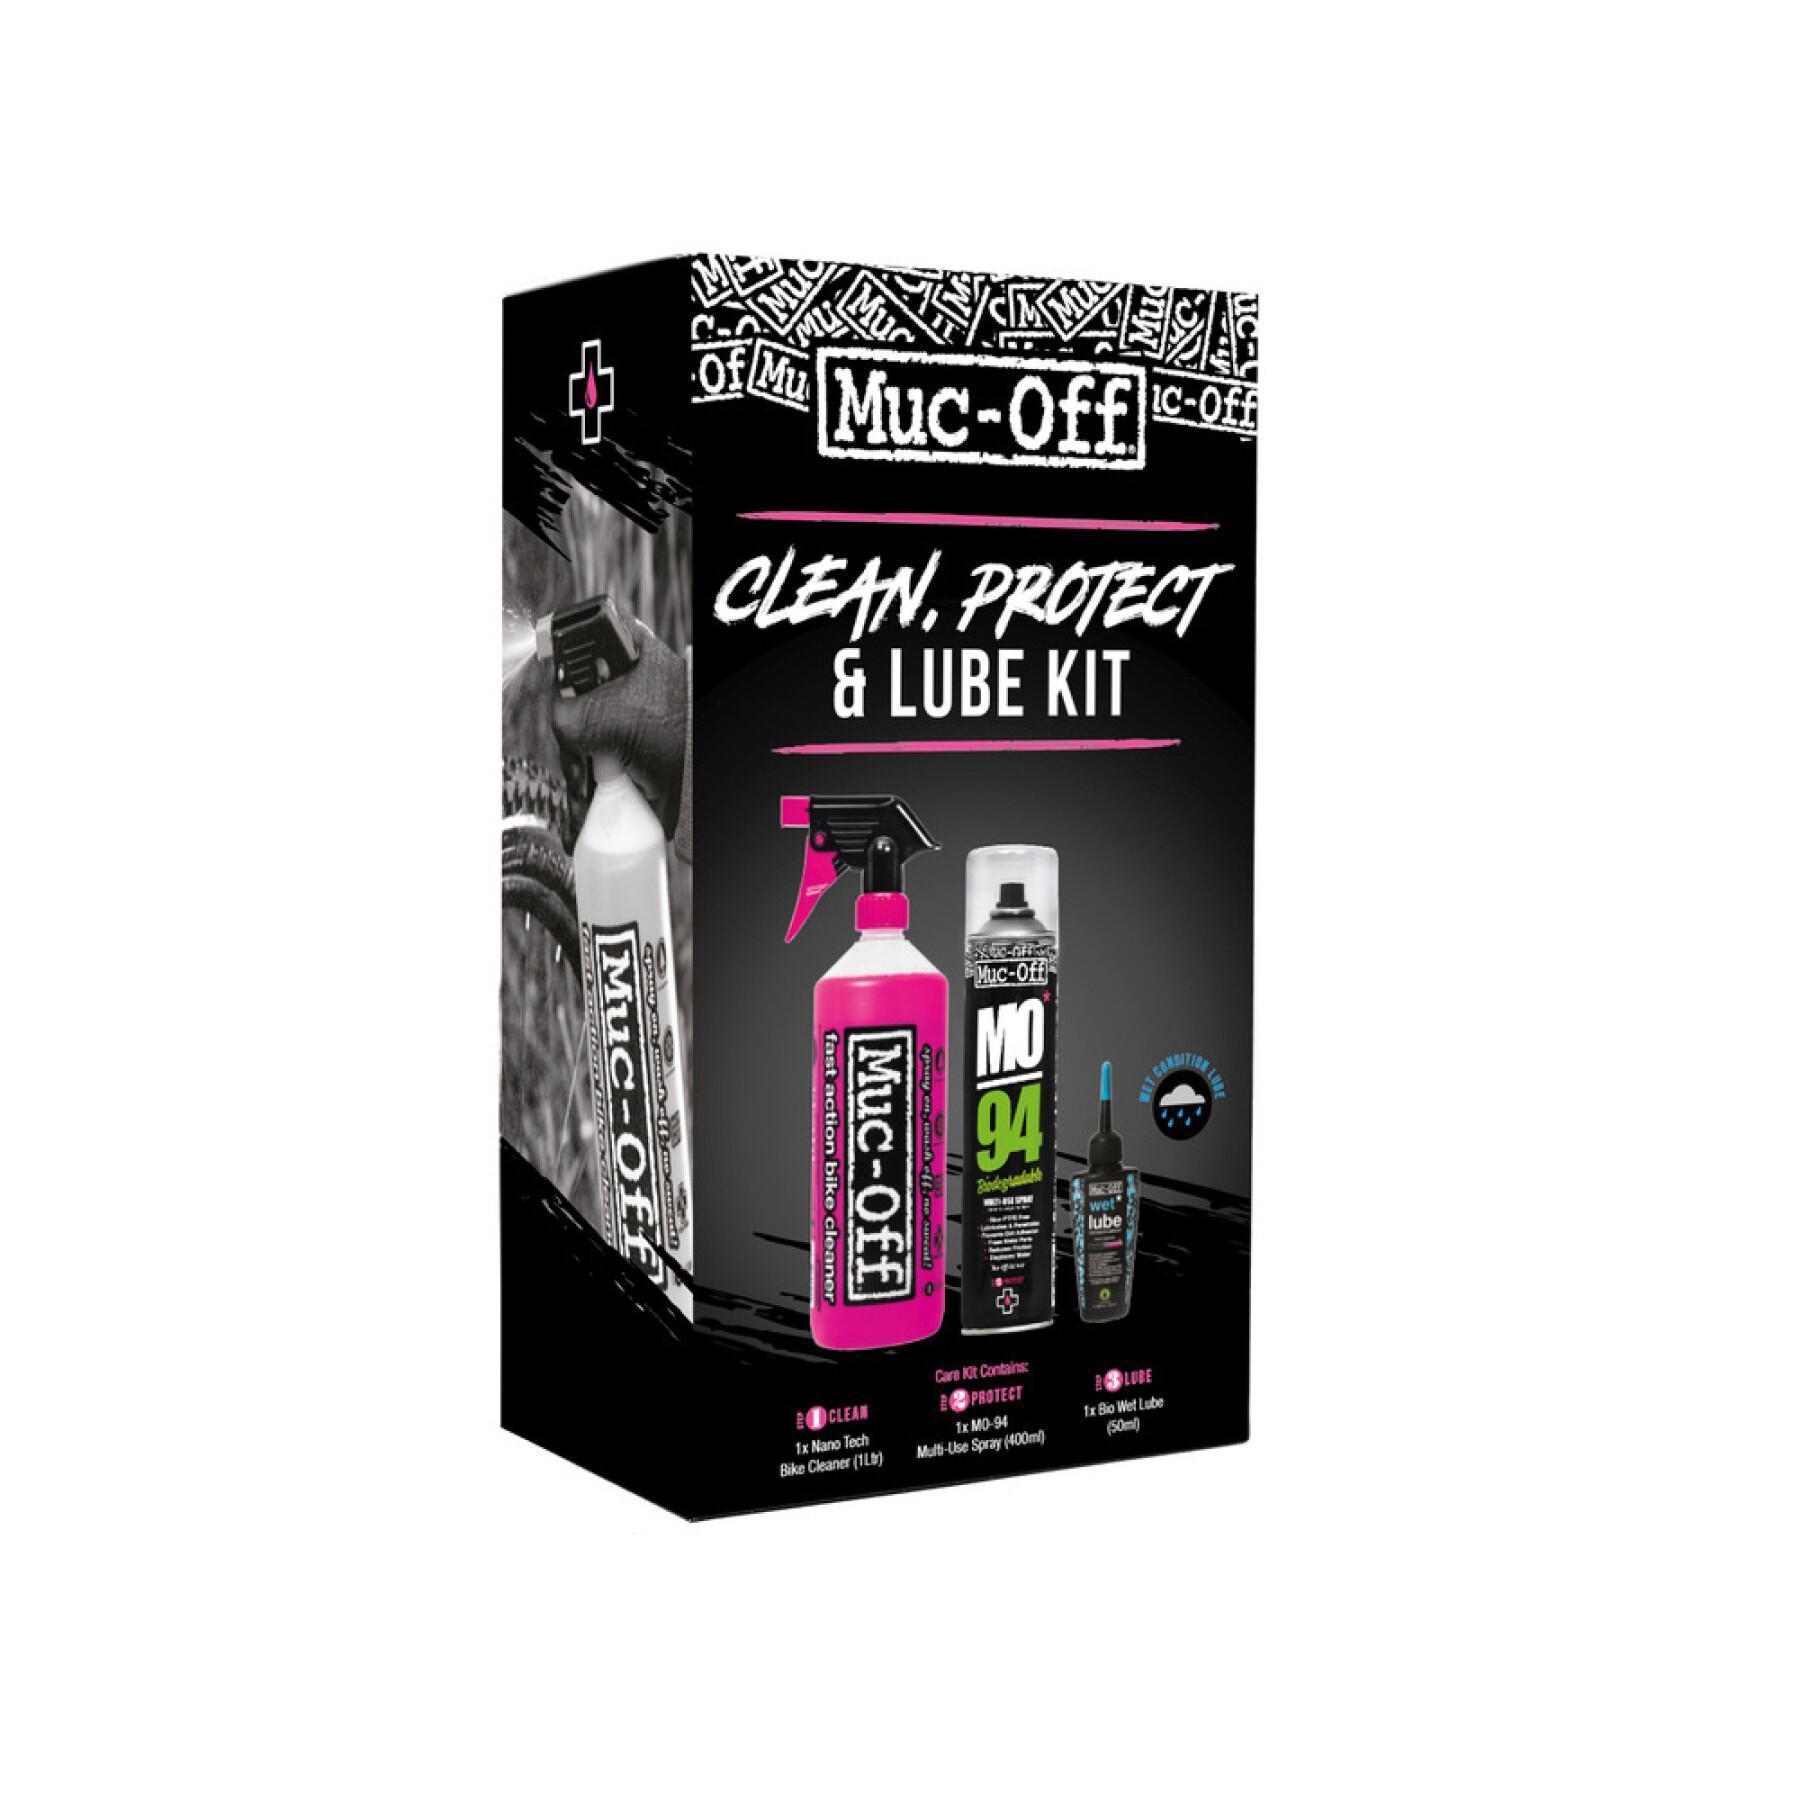 Cleaning Pack Muc-Off clean protect Lube kit wet